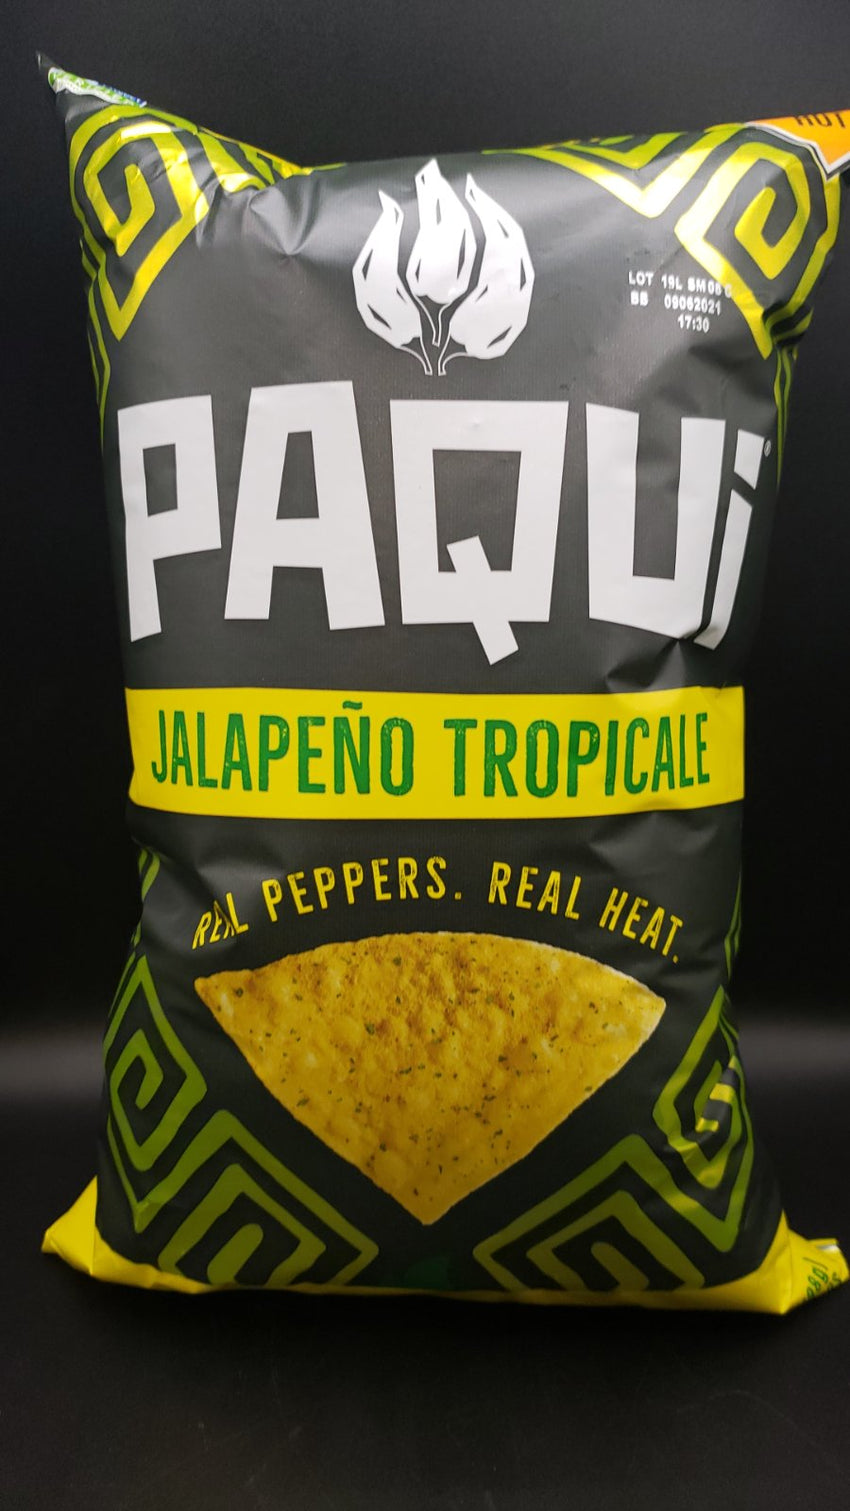 Jalapeno Tropicale Tortilla Chips